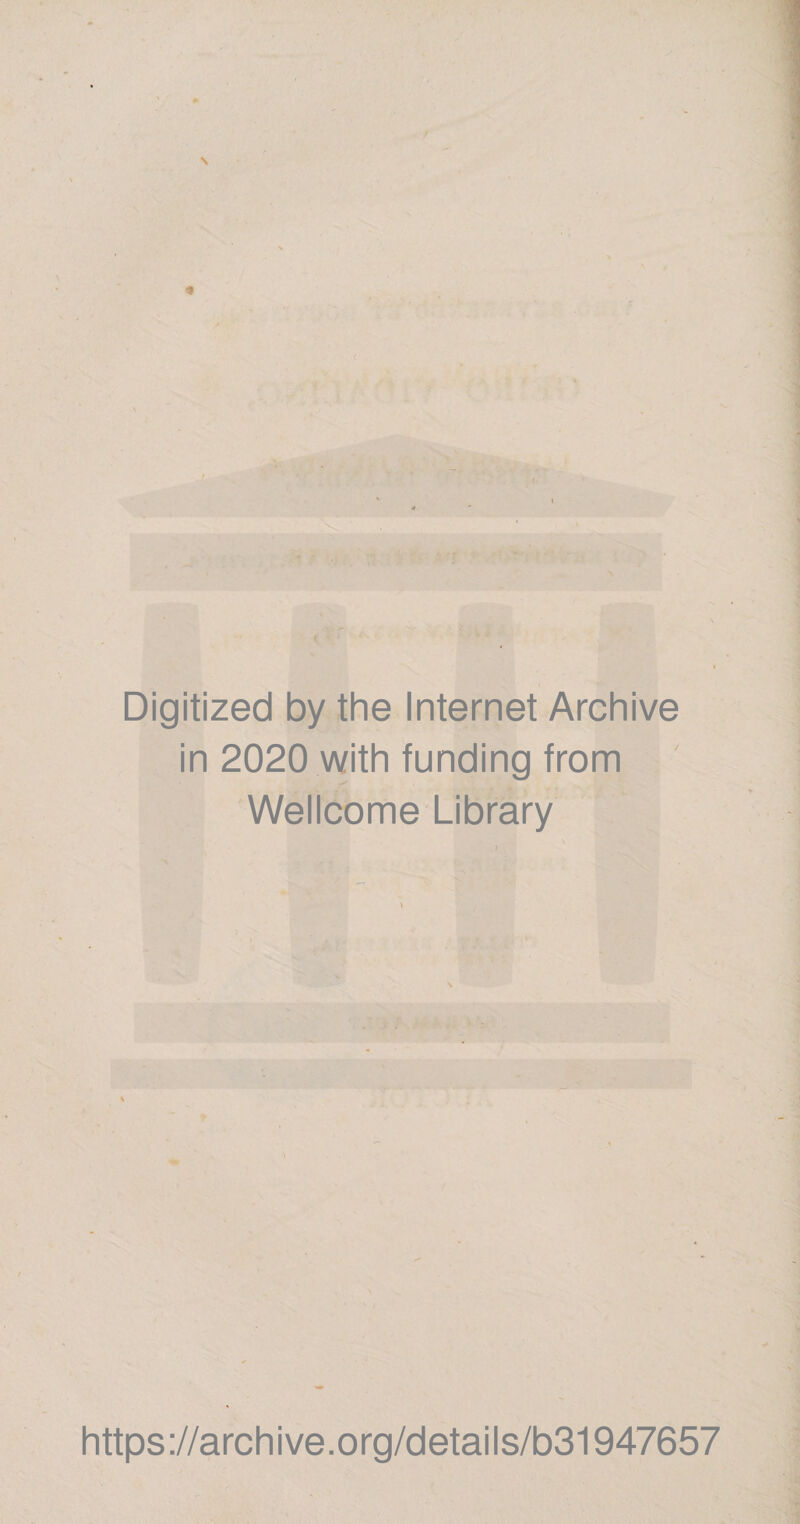 \ * ( Digitized by the Internet Archive in 2020 with funding from Wellcome Library https://archive.org/details/b31947657